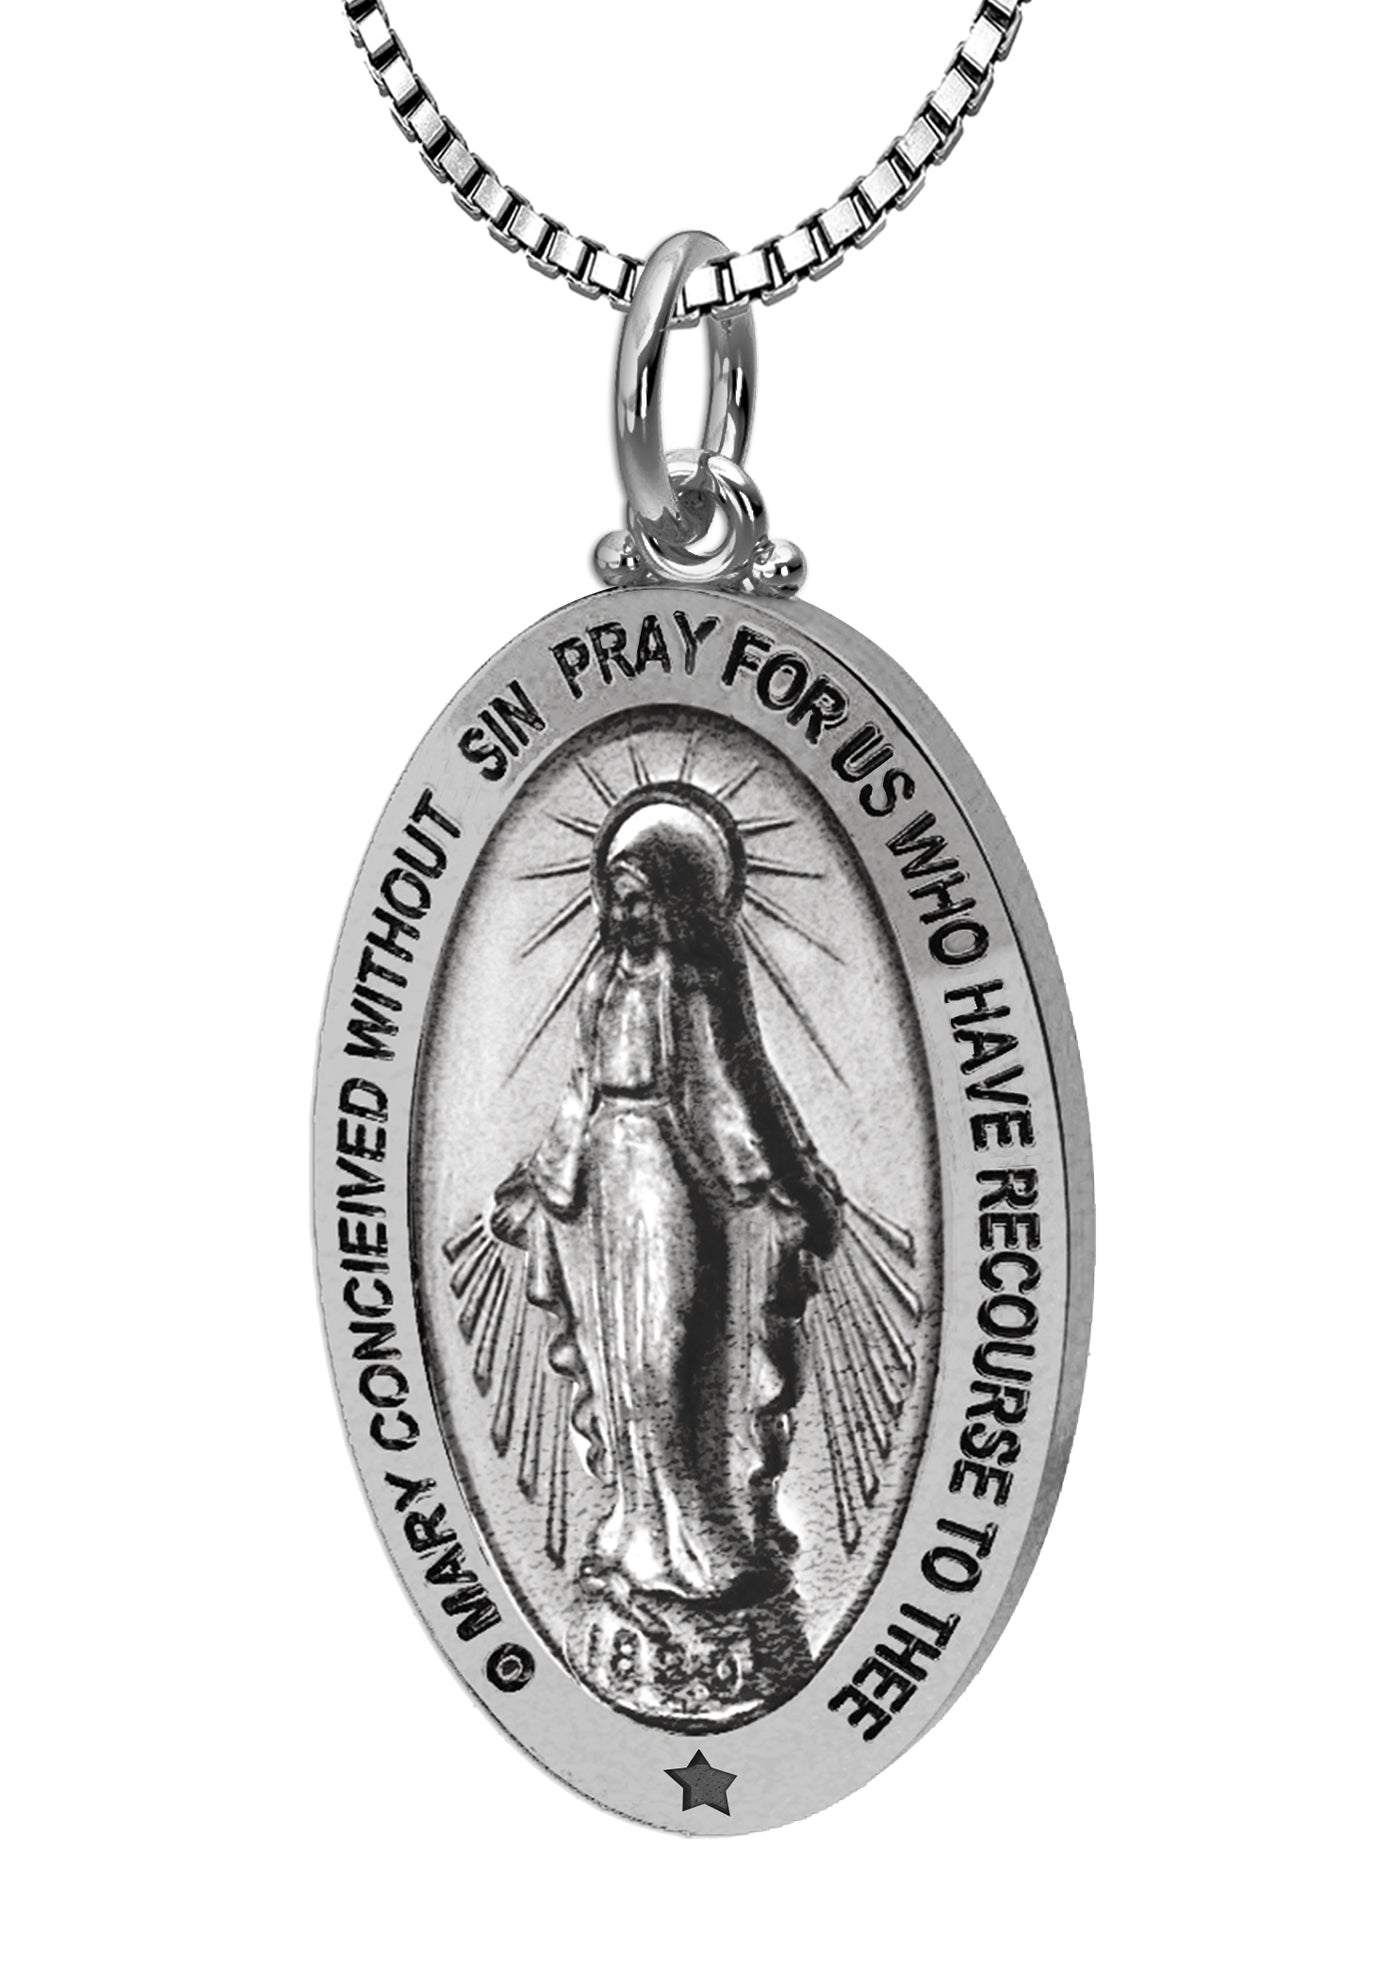 US Jewels Ladies Antique 925 Sterling Silver Large Miraculous Virgin Mary Pendant Necklace, 26mm - US Jewels